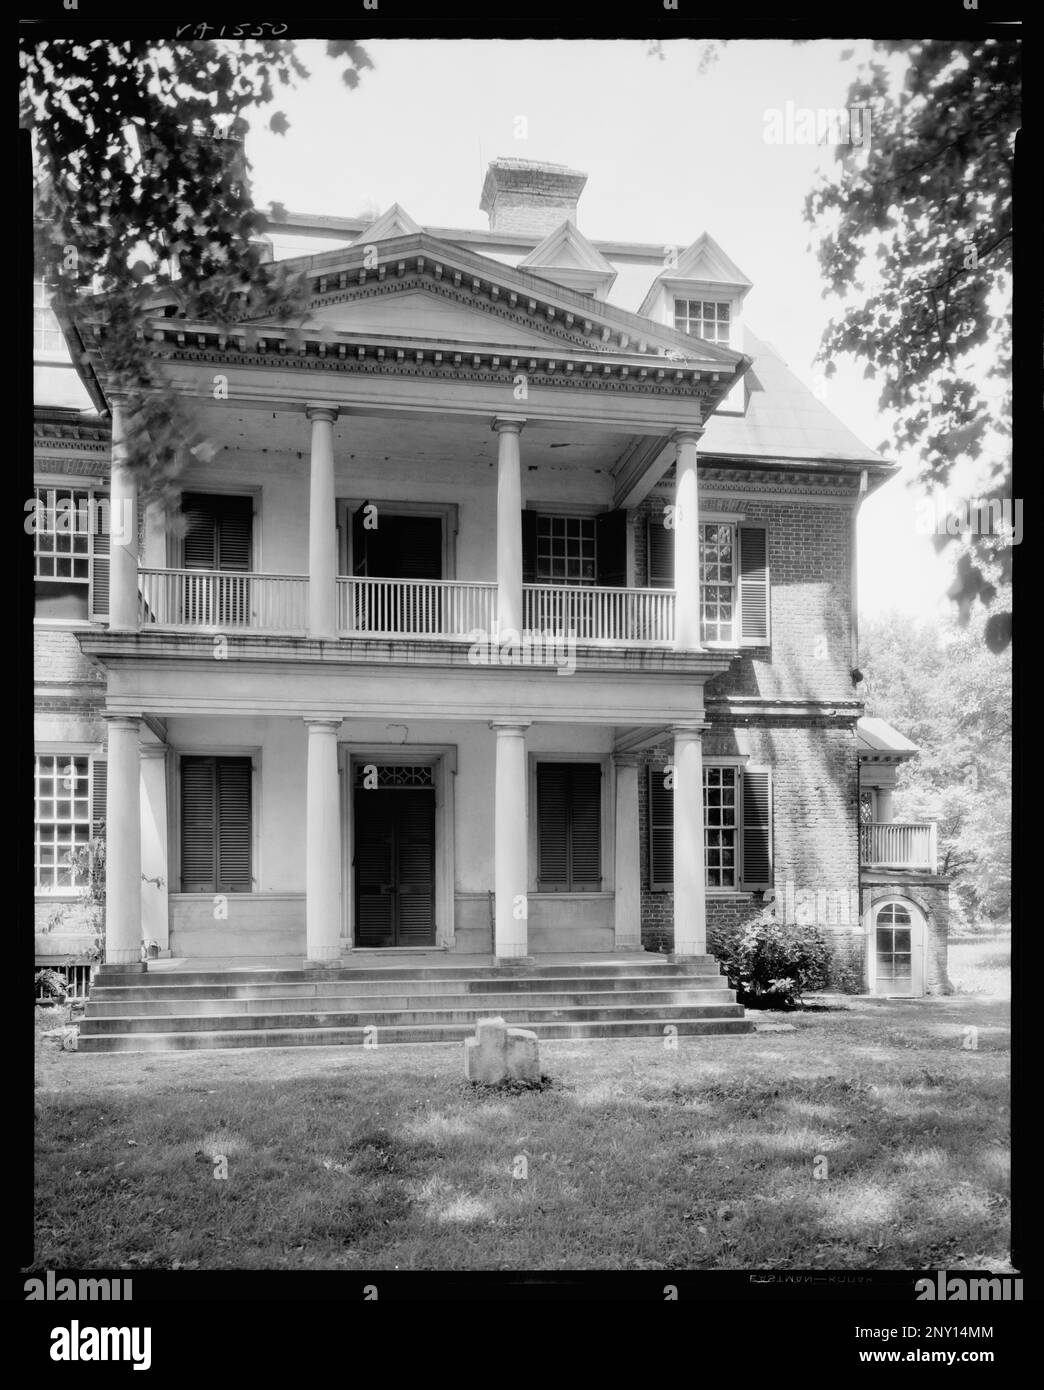 Shirley, Charles City County, Virginia. Carnegie Survey of the Architecture of the South. United States  Virginia  Charles City County  Shirley, Pediments, Balconies, Porches, Houses. Stock Photo